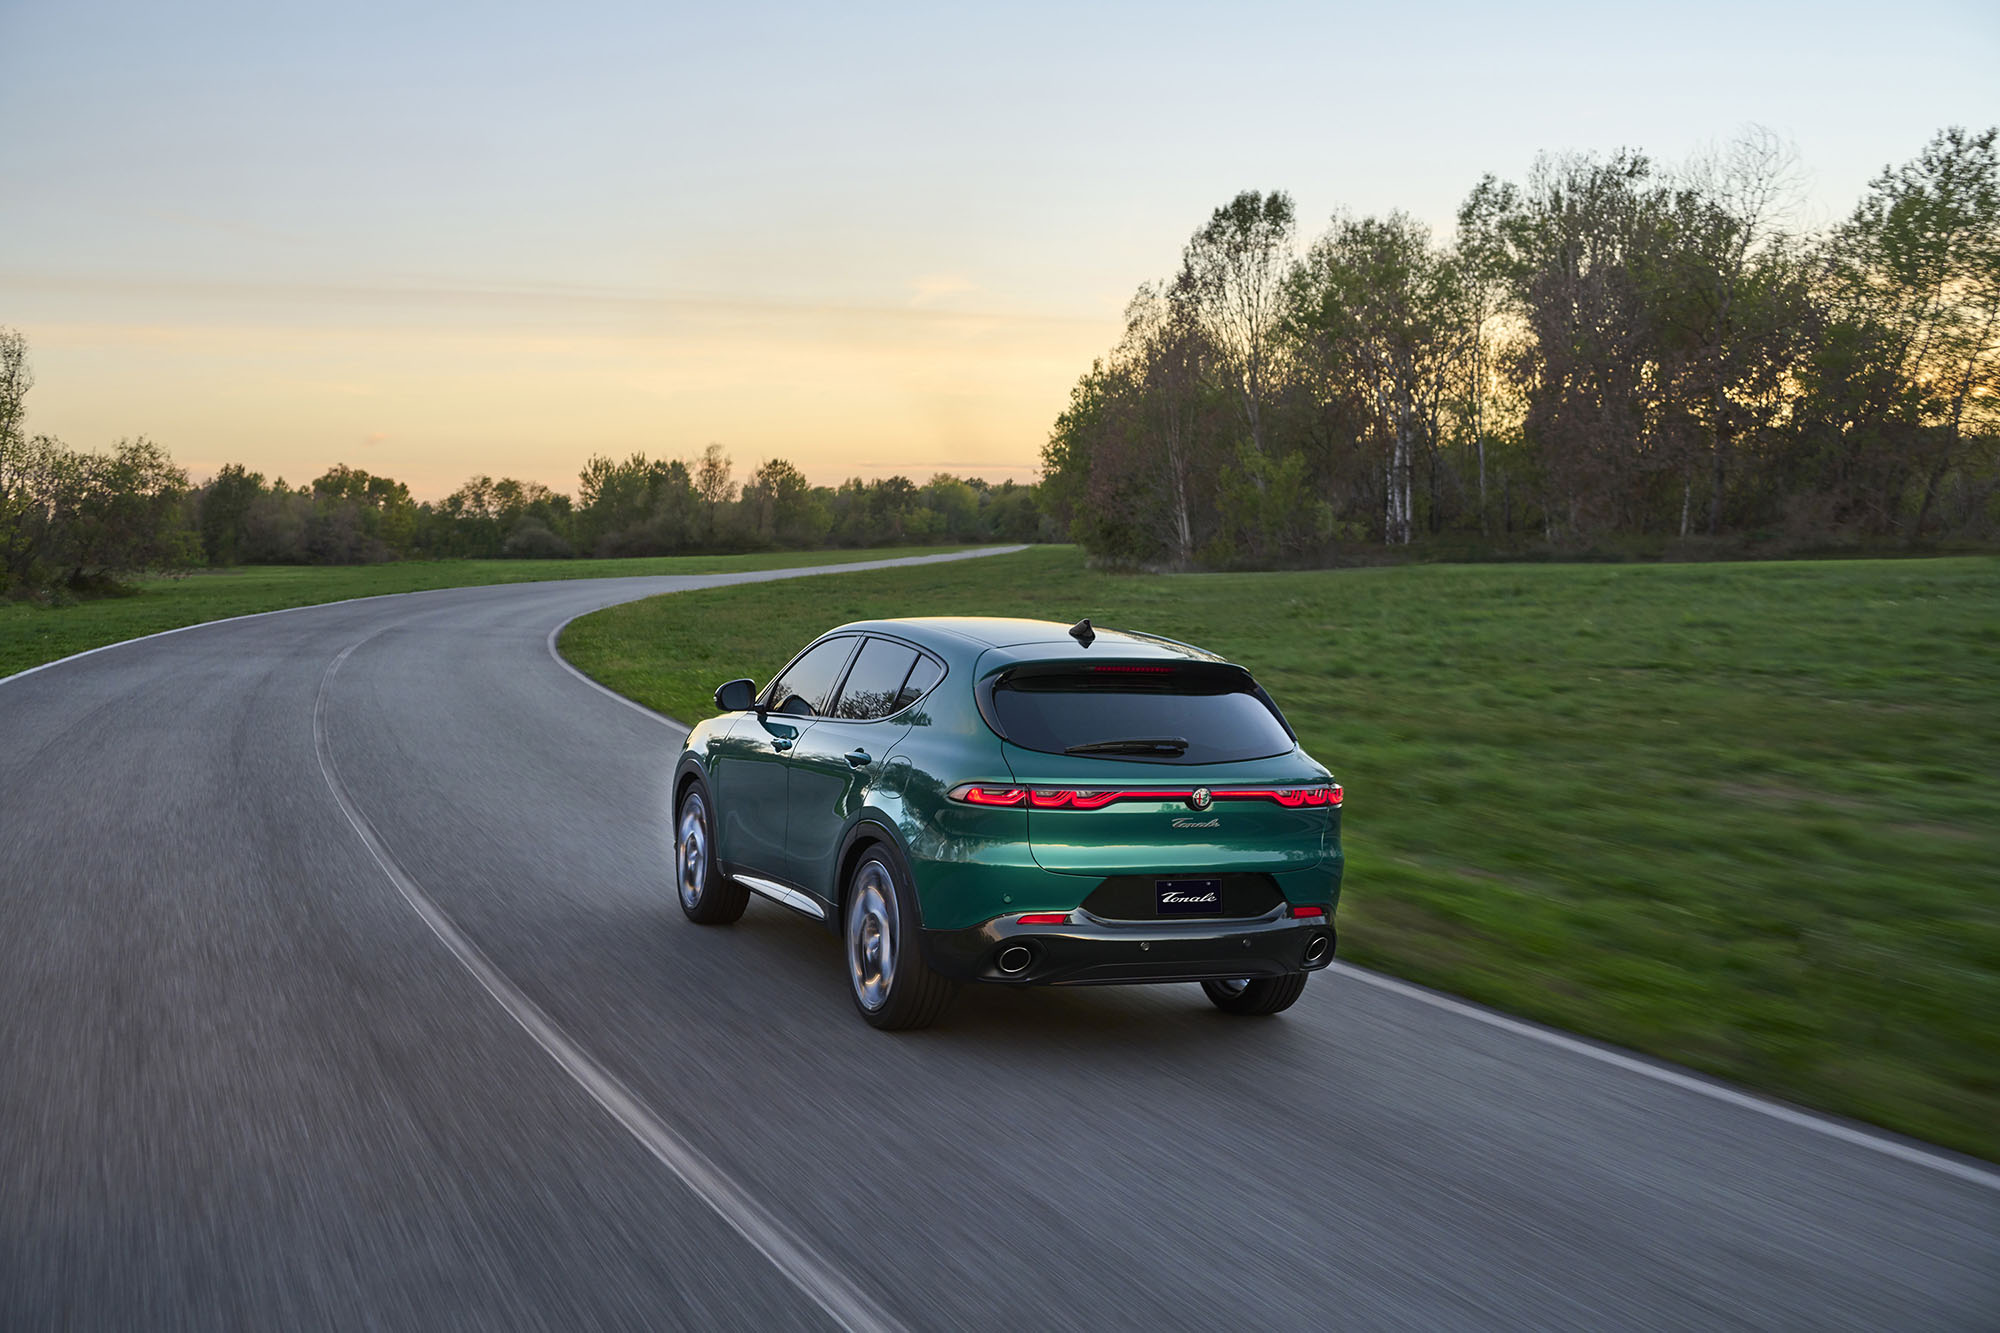 Green Alfa Romeo Tonale driving down paved road next to grass